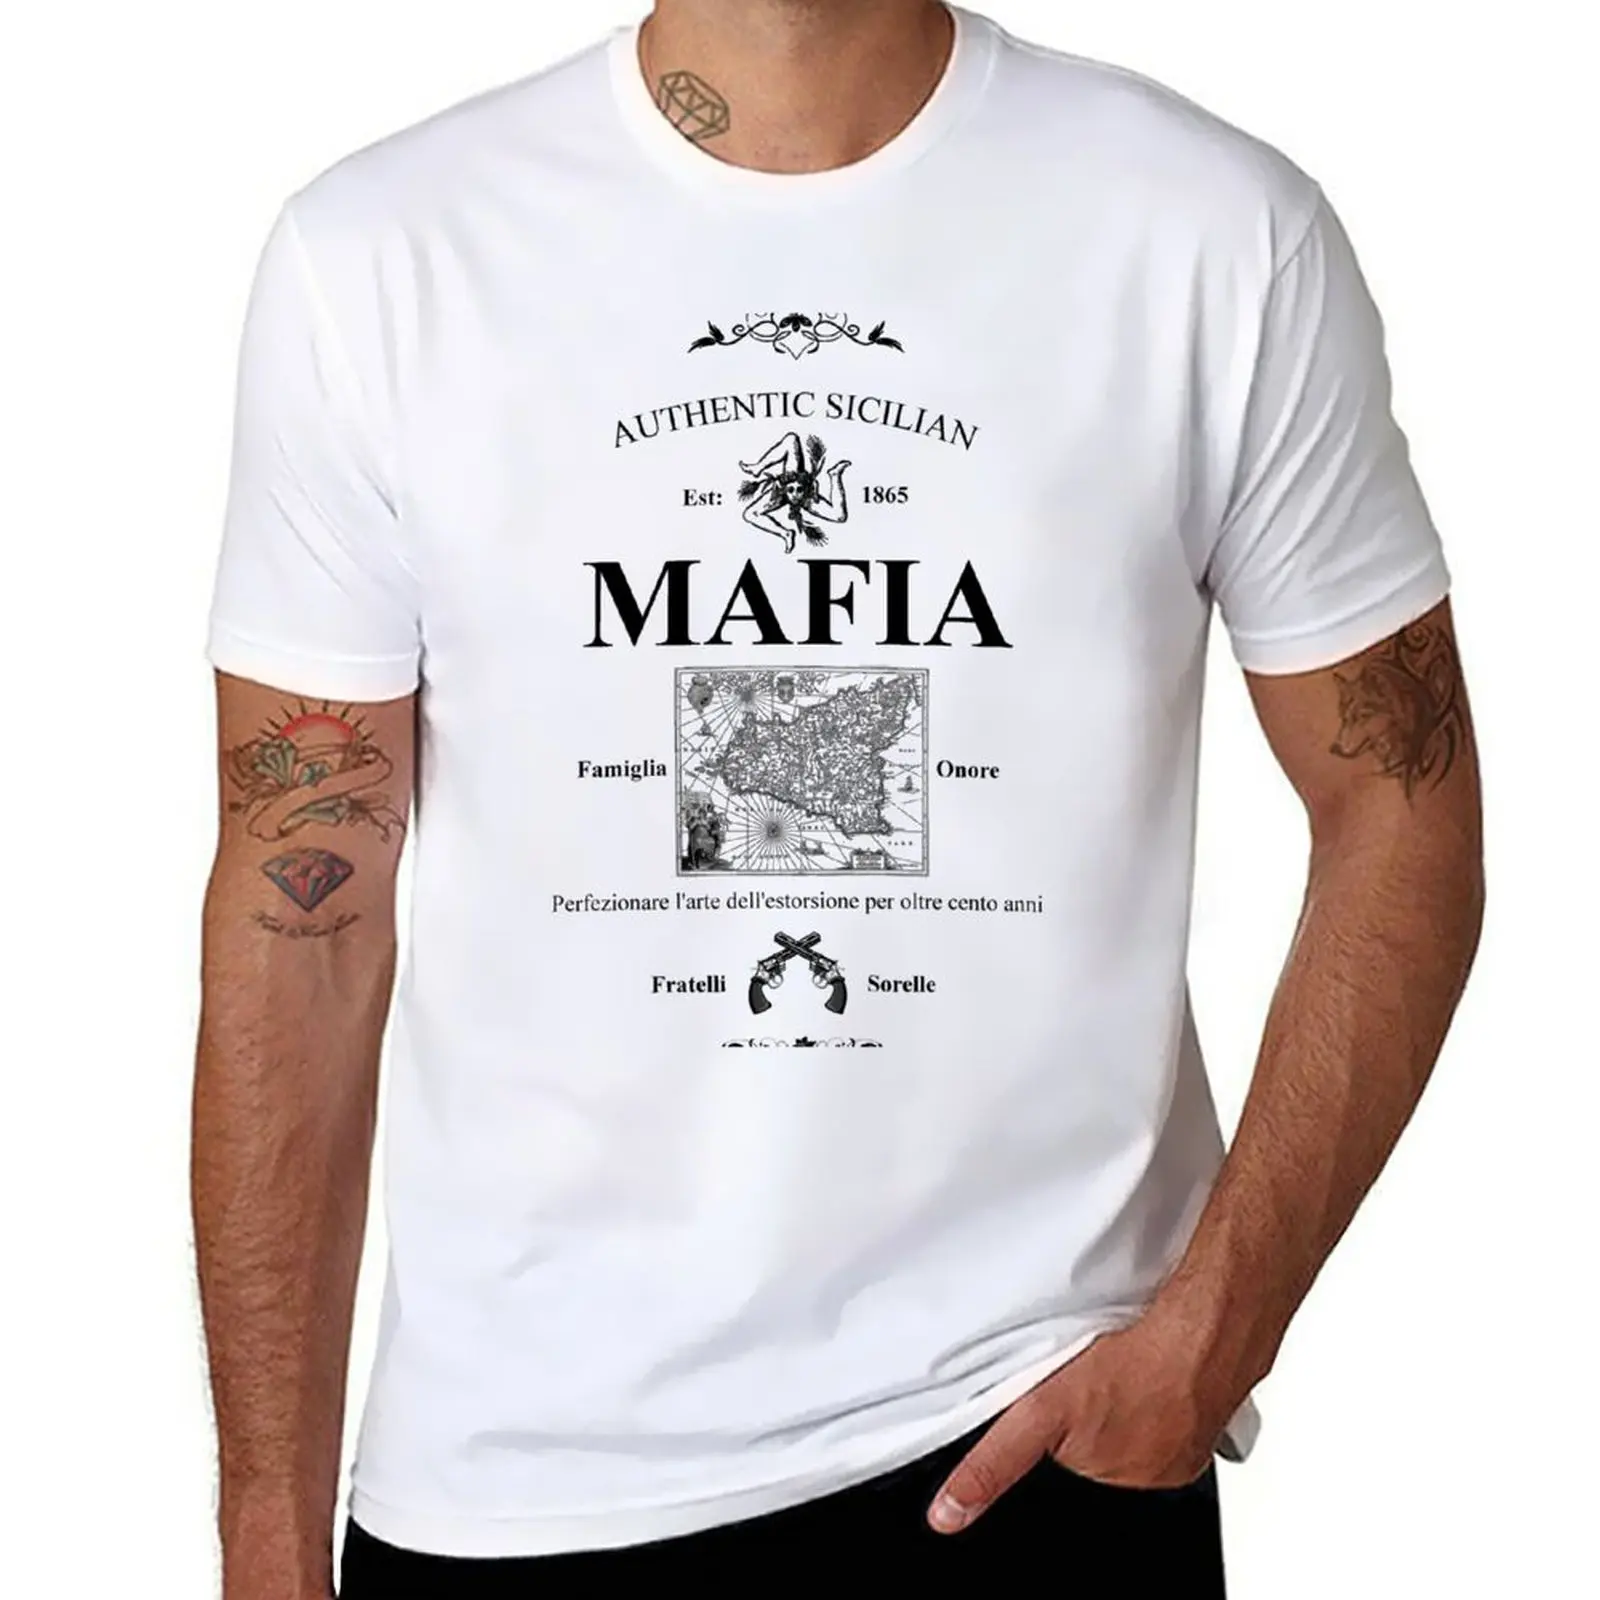 New Mafia Authentic Logo Sicily Italy Slogan Tee Shirt T-Shirt hippie clothes cute tops and tall t shirts for men -